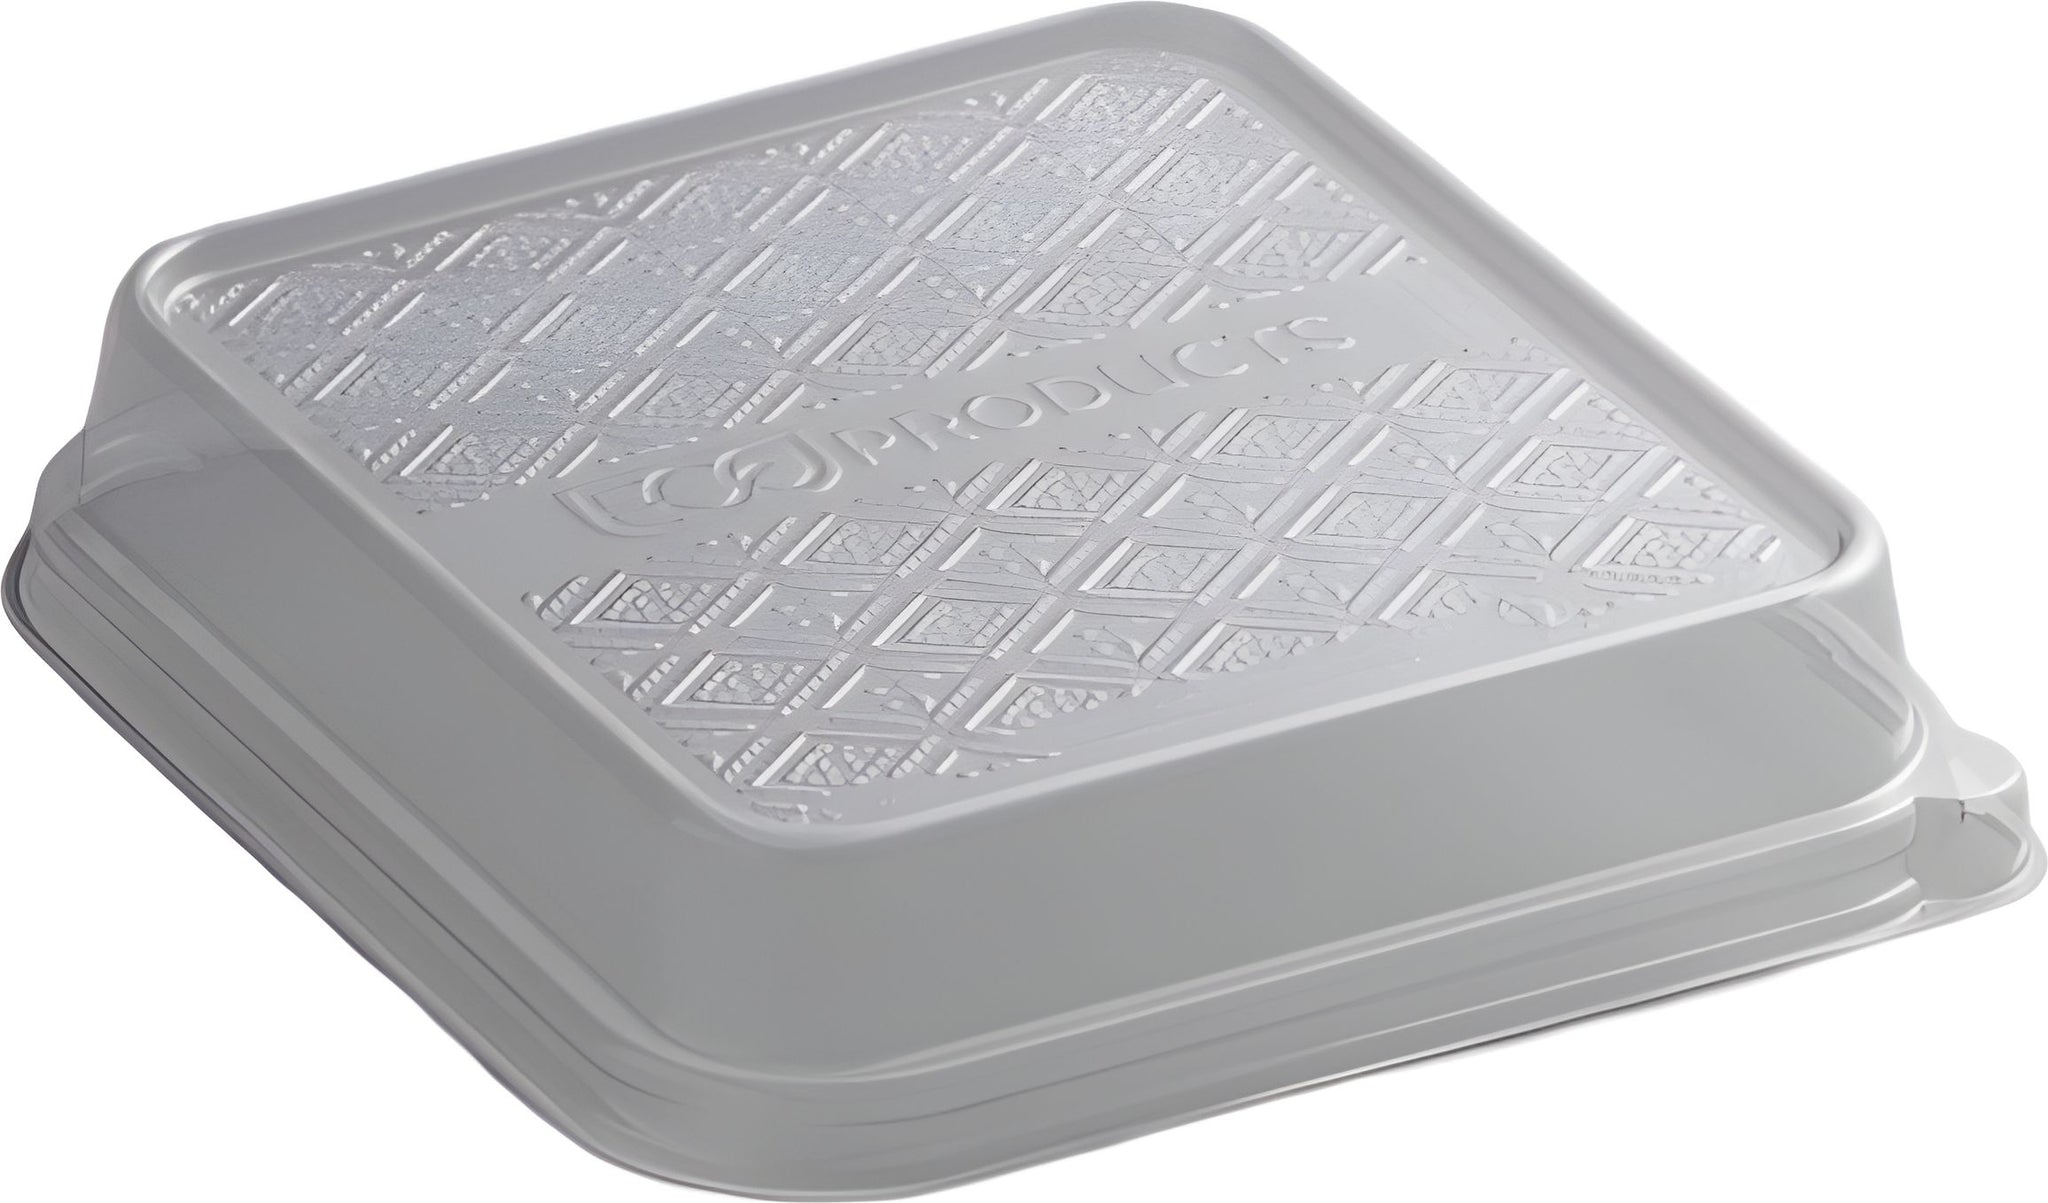 Joshen Paper & Packaging - 7" Dome Lid for WorldView Takeout Container - EPSCS73LID